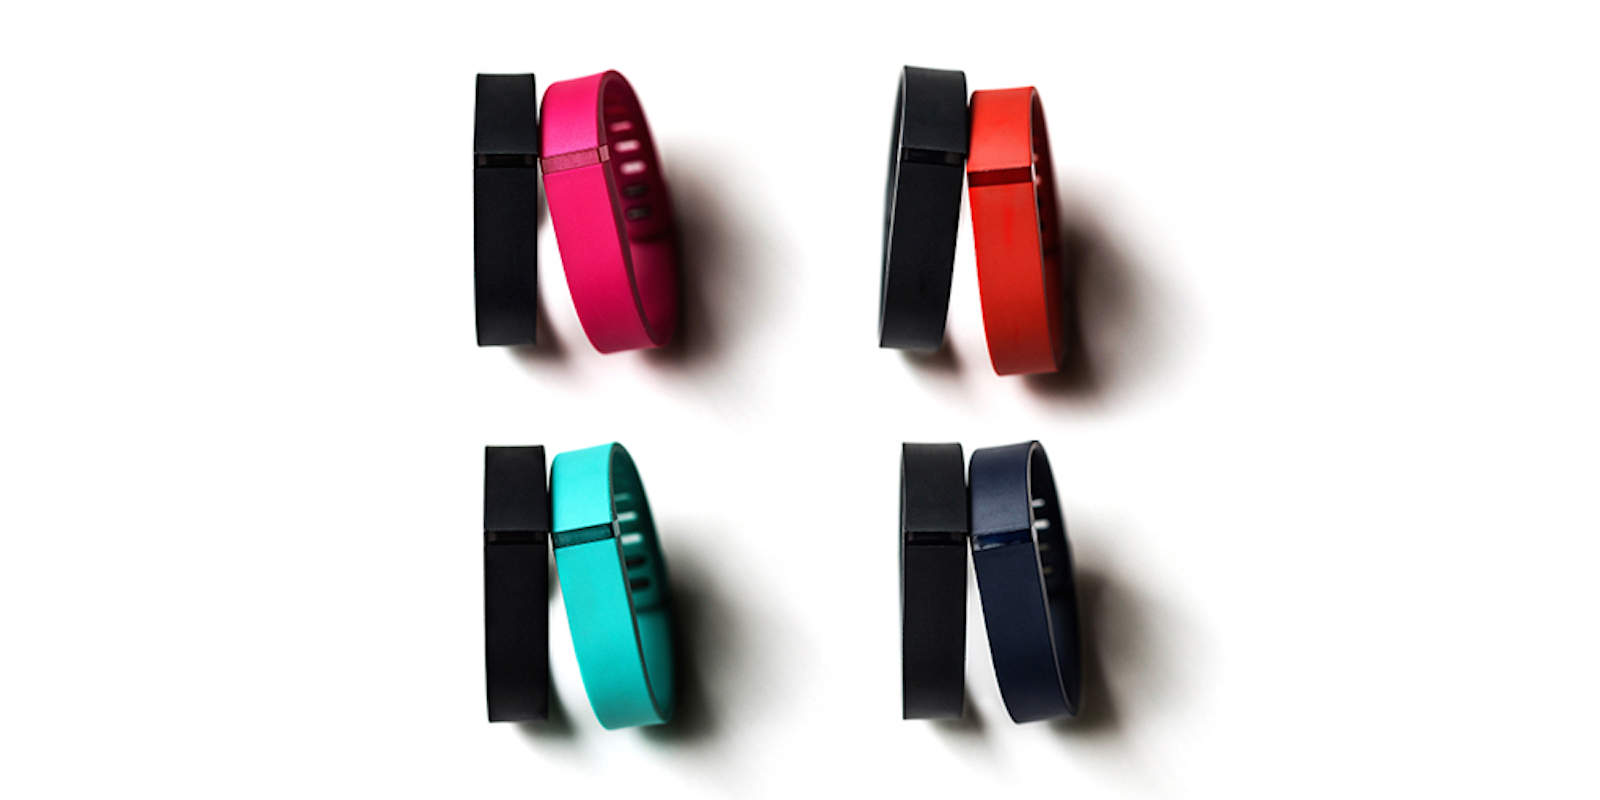 Get all the fitness features of the Fitbit Flex for a fraction of the price.